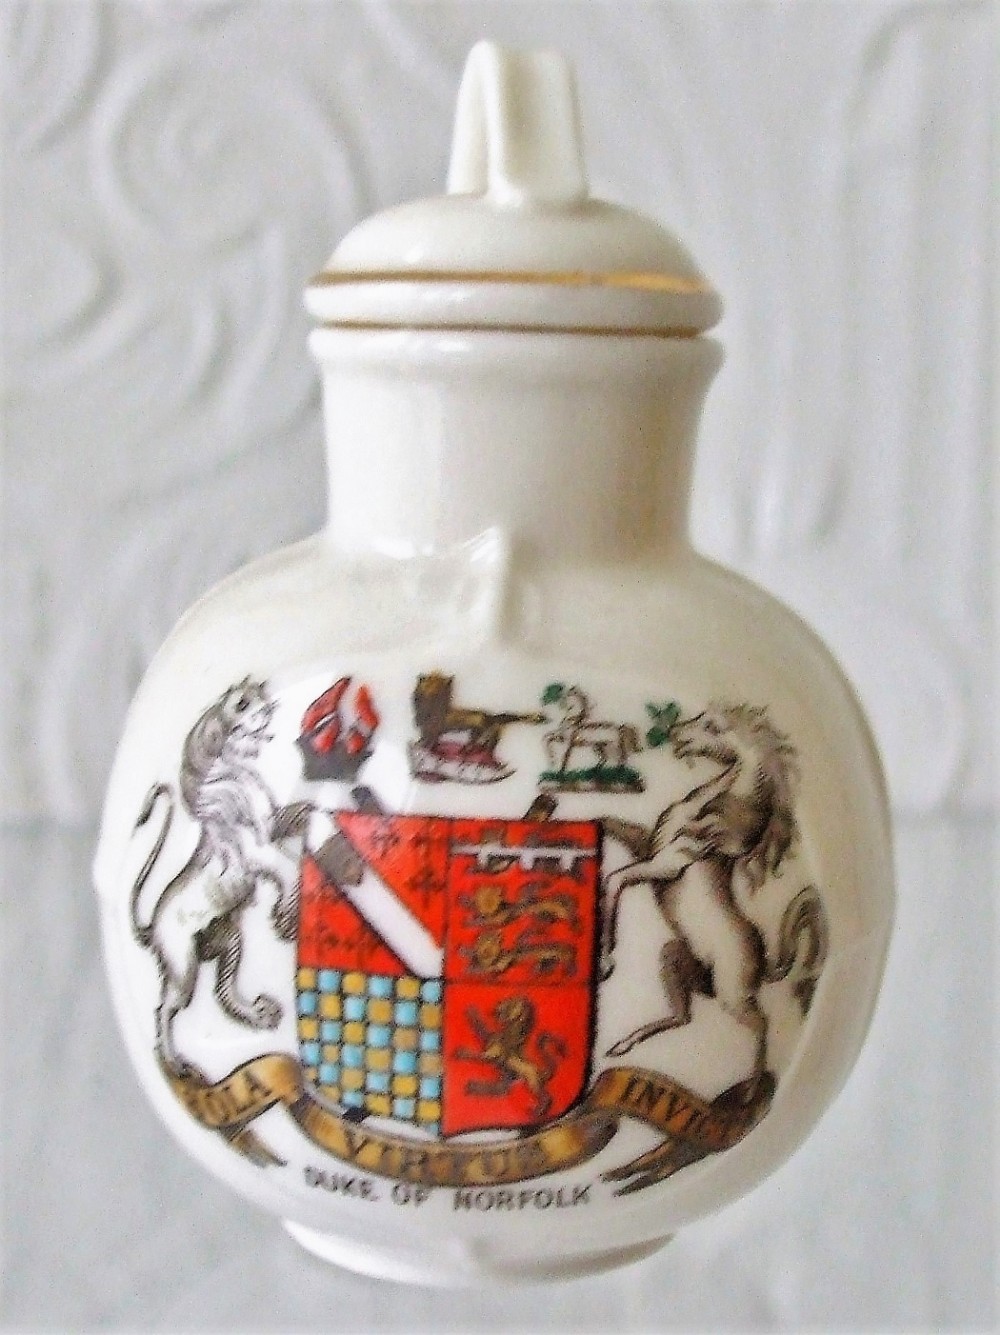 wh goss welsh milk can and lid acc no 287 duke of norfolk